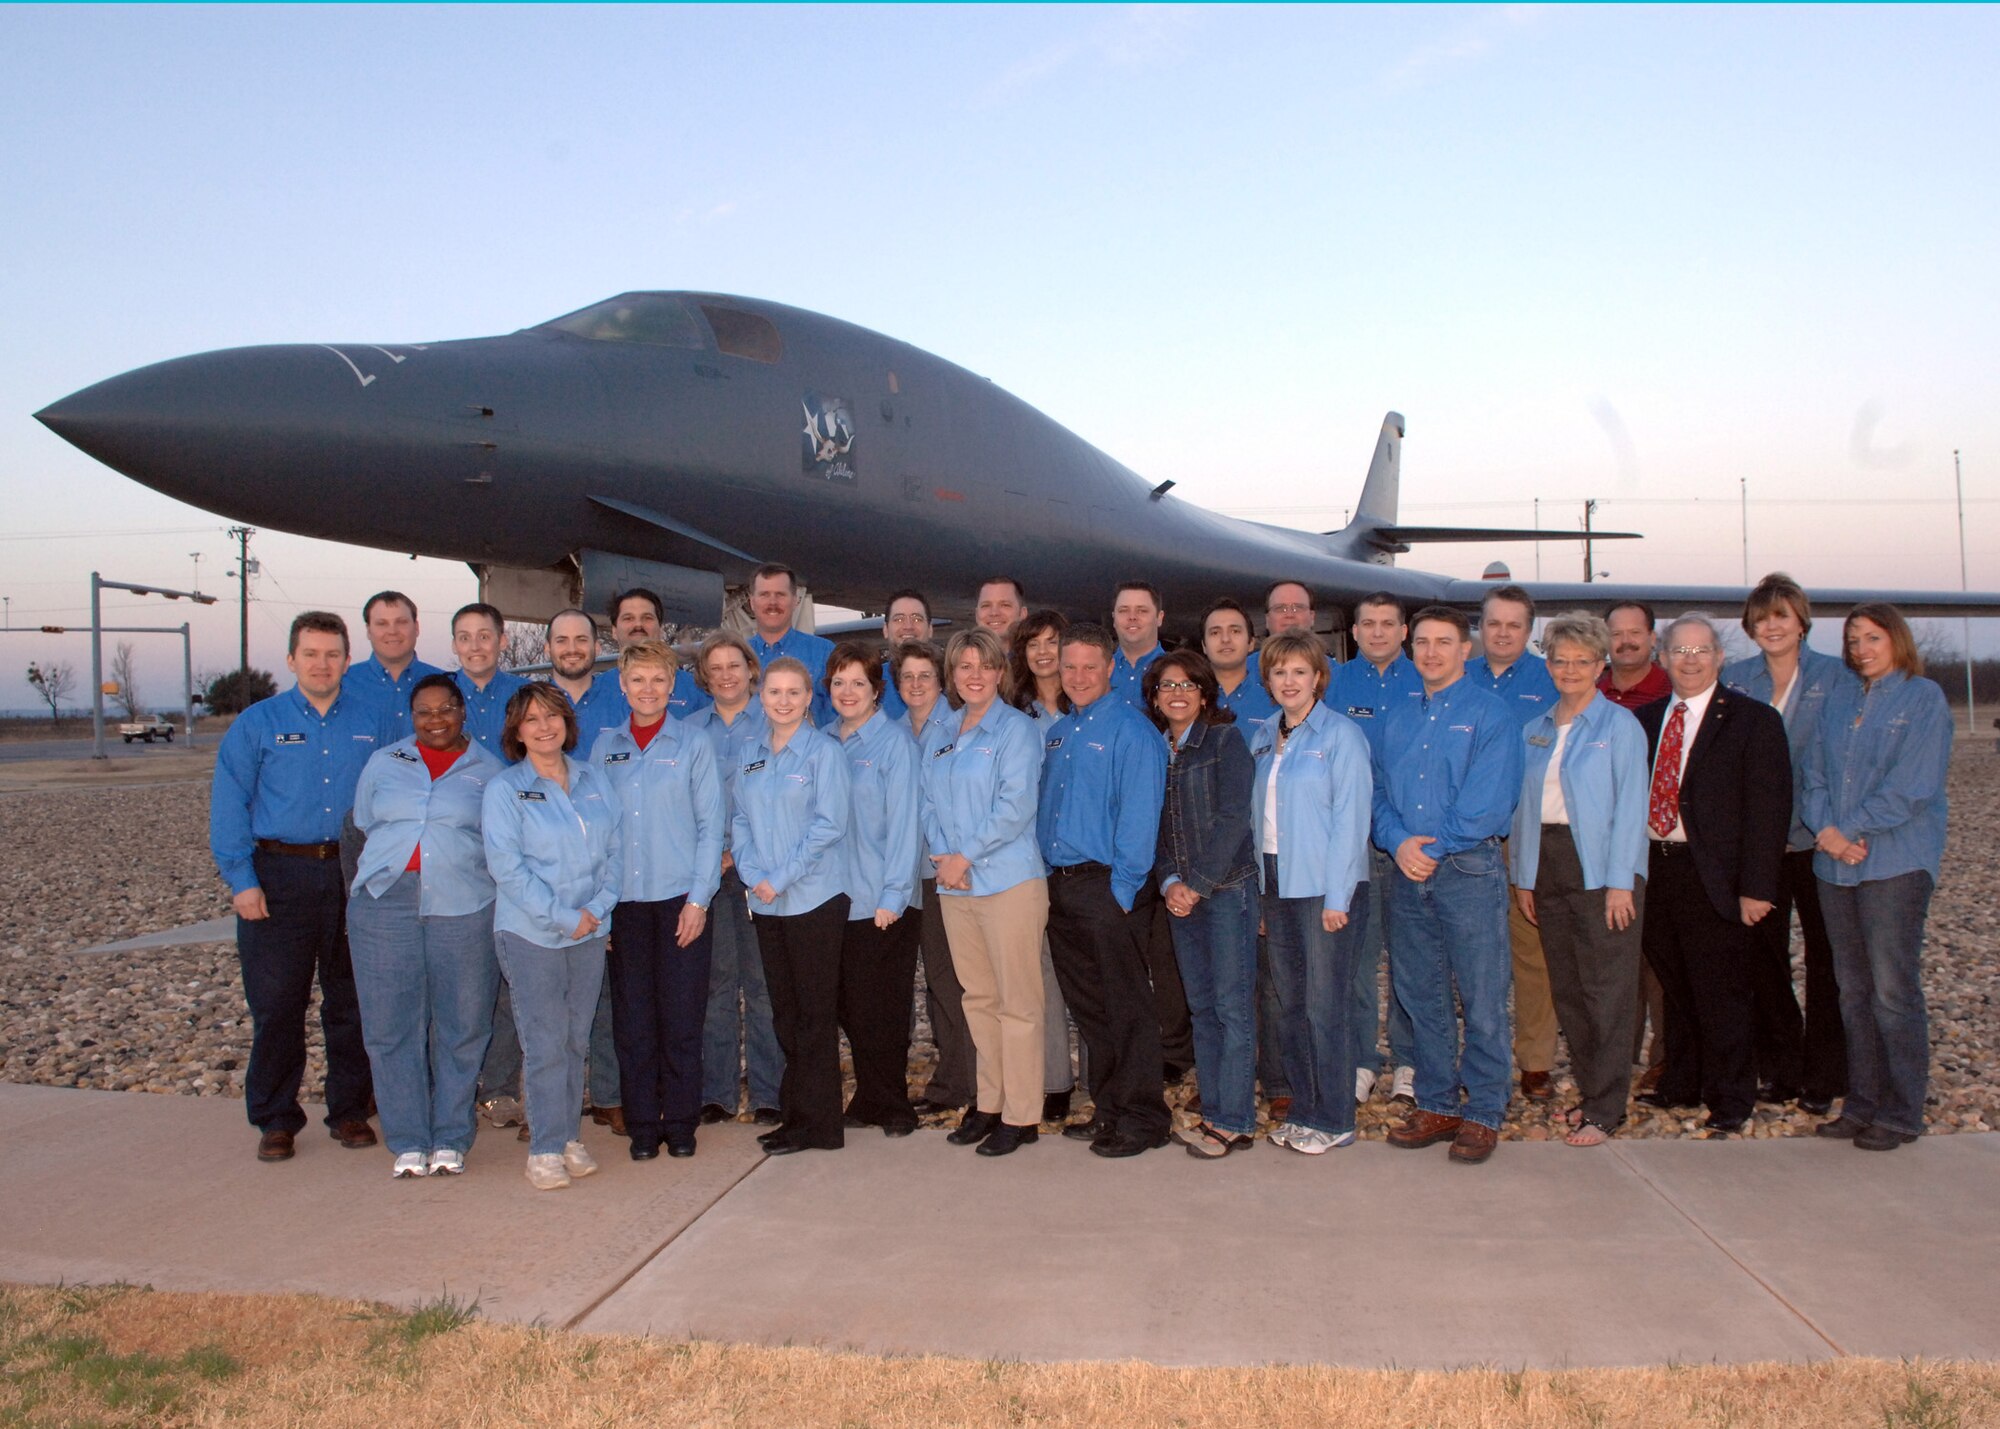 DYESS AIR FORCE BASE, Texas -- Business and community leaders from the local area visited Dyess March 14 as part of Leadership Abilene. The tour allowed the local leaders to be more acquainted with operations here. (U.S. Air Force photo by Airman 1st Class Stephen Reyes)